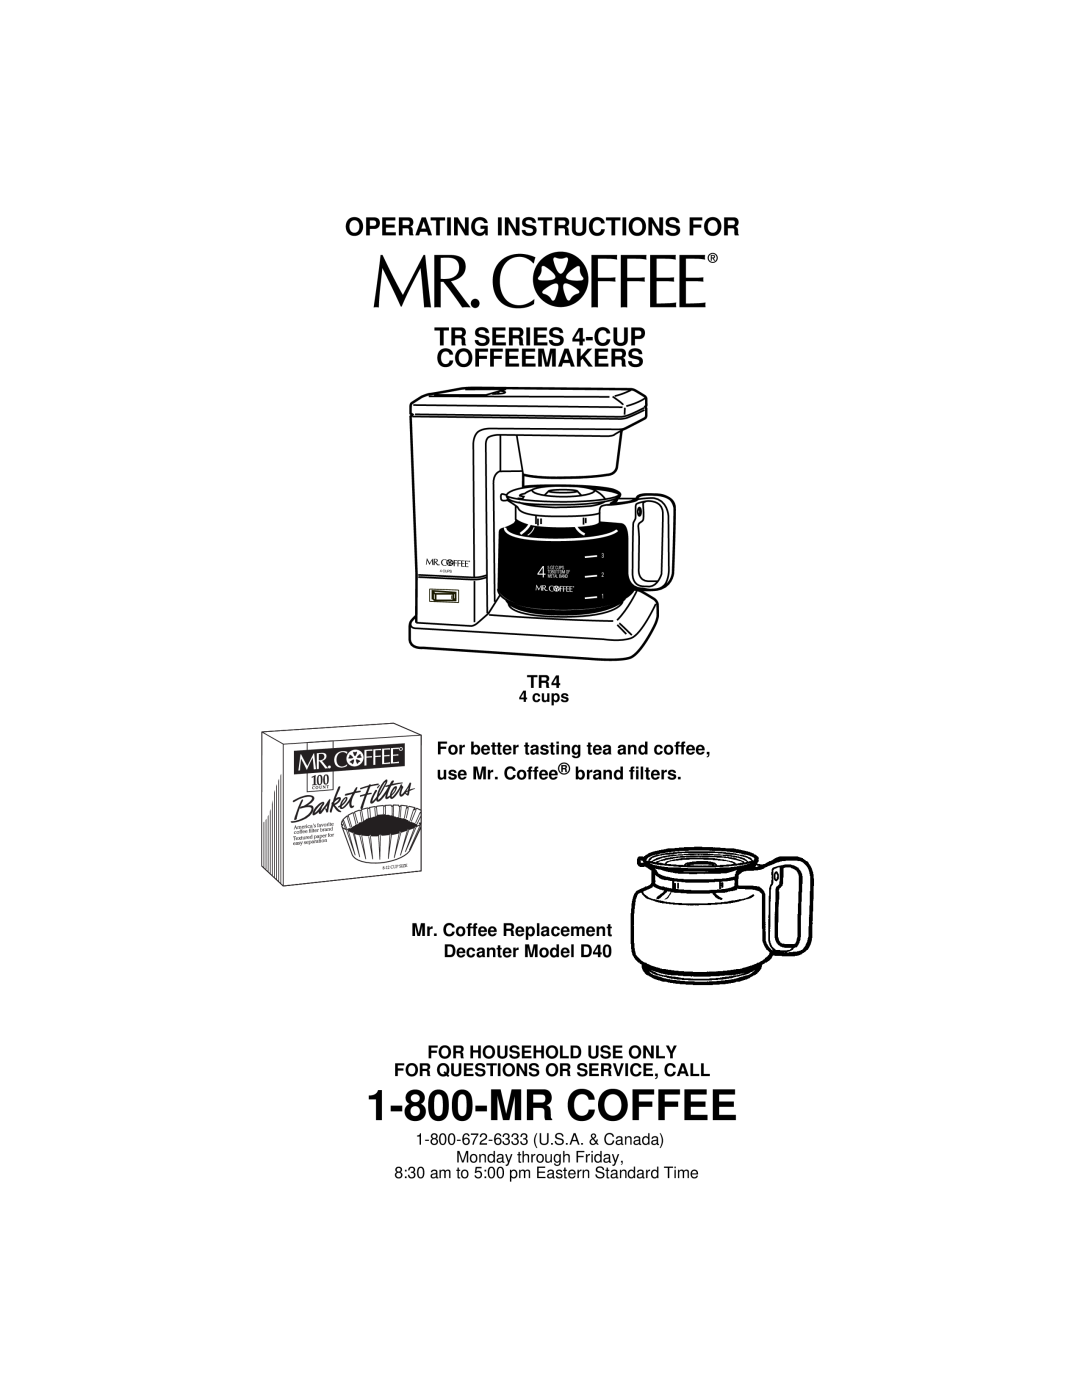 Mr. Coffee D40 manual Mr Coffee, For better tasting tea and coffee, use Mr. Coffee brand filters 